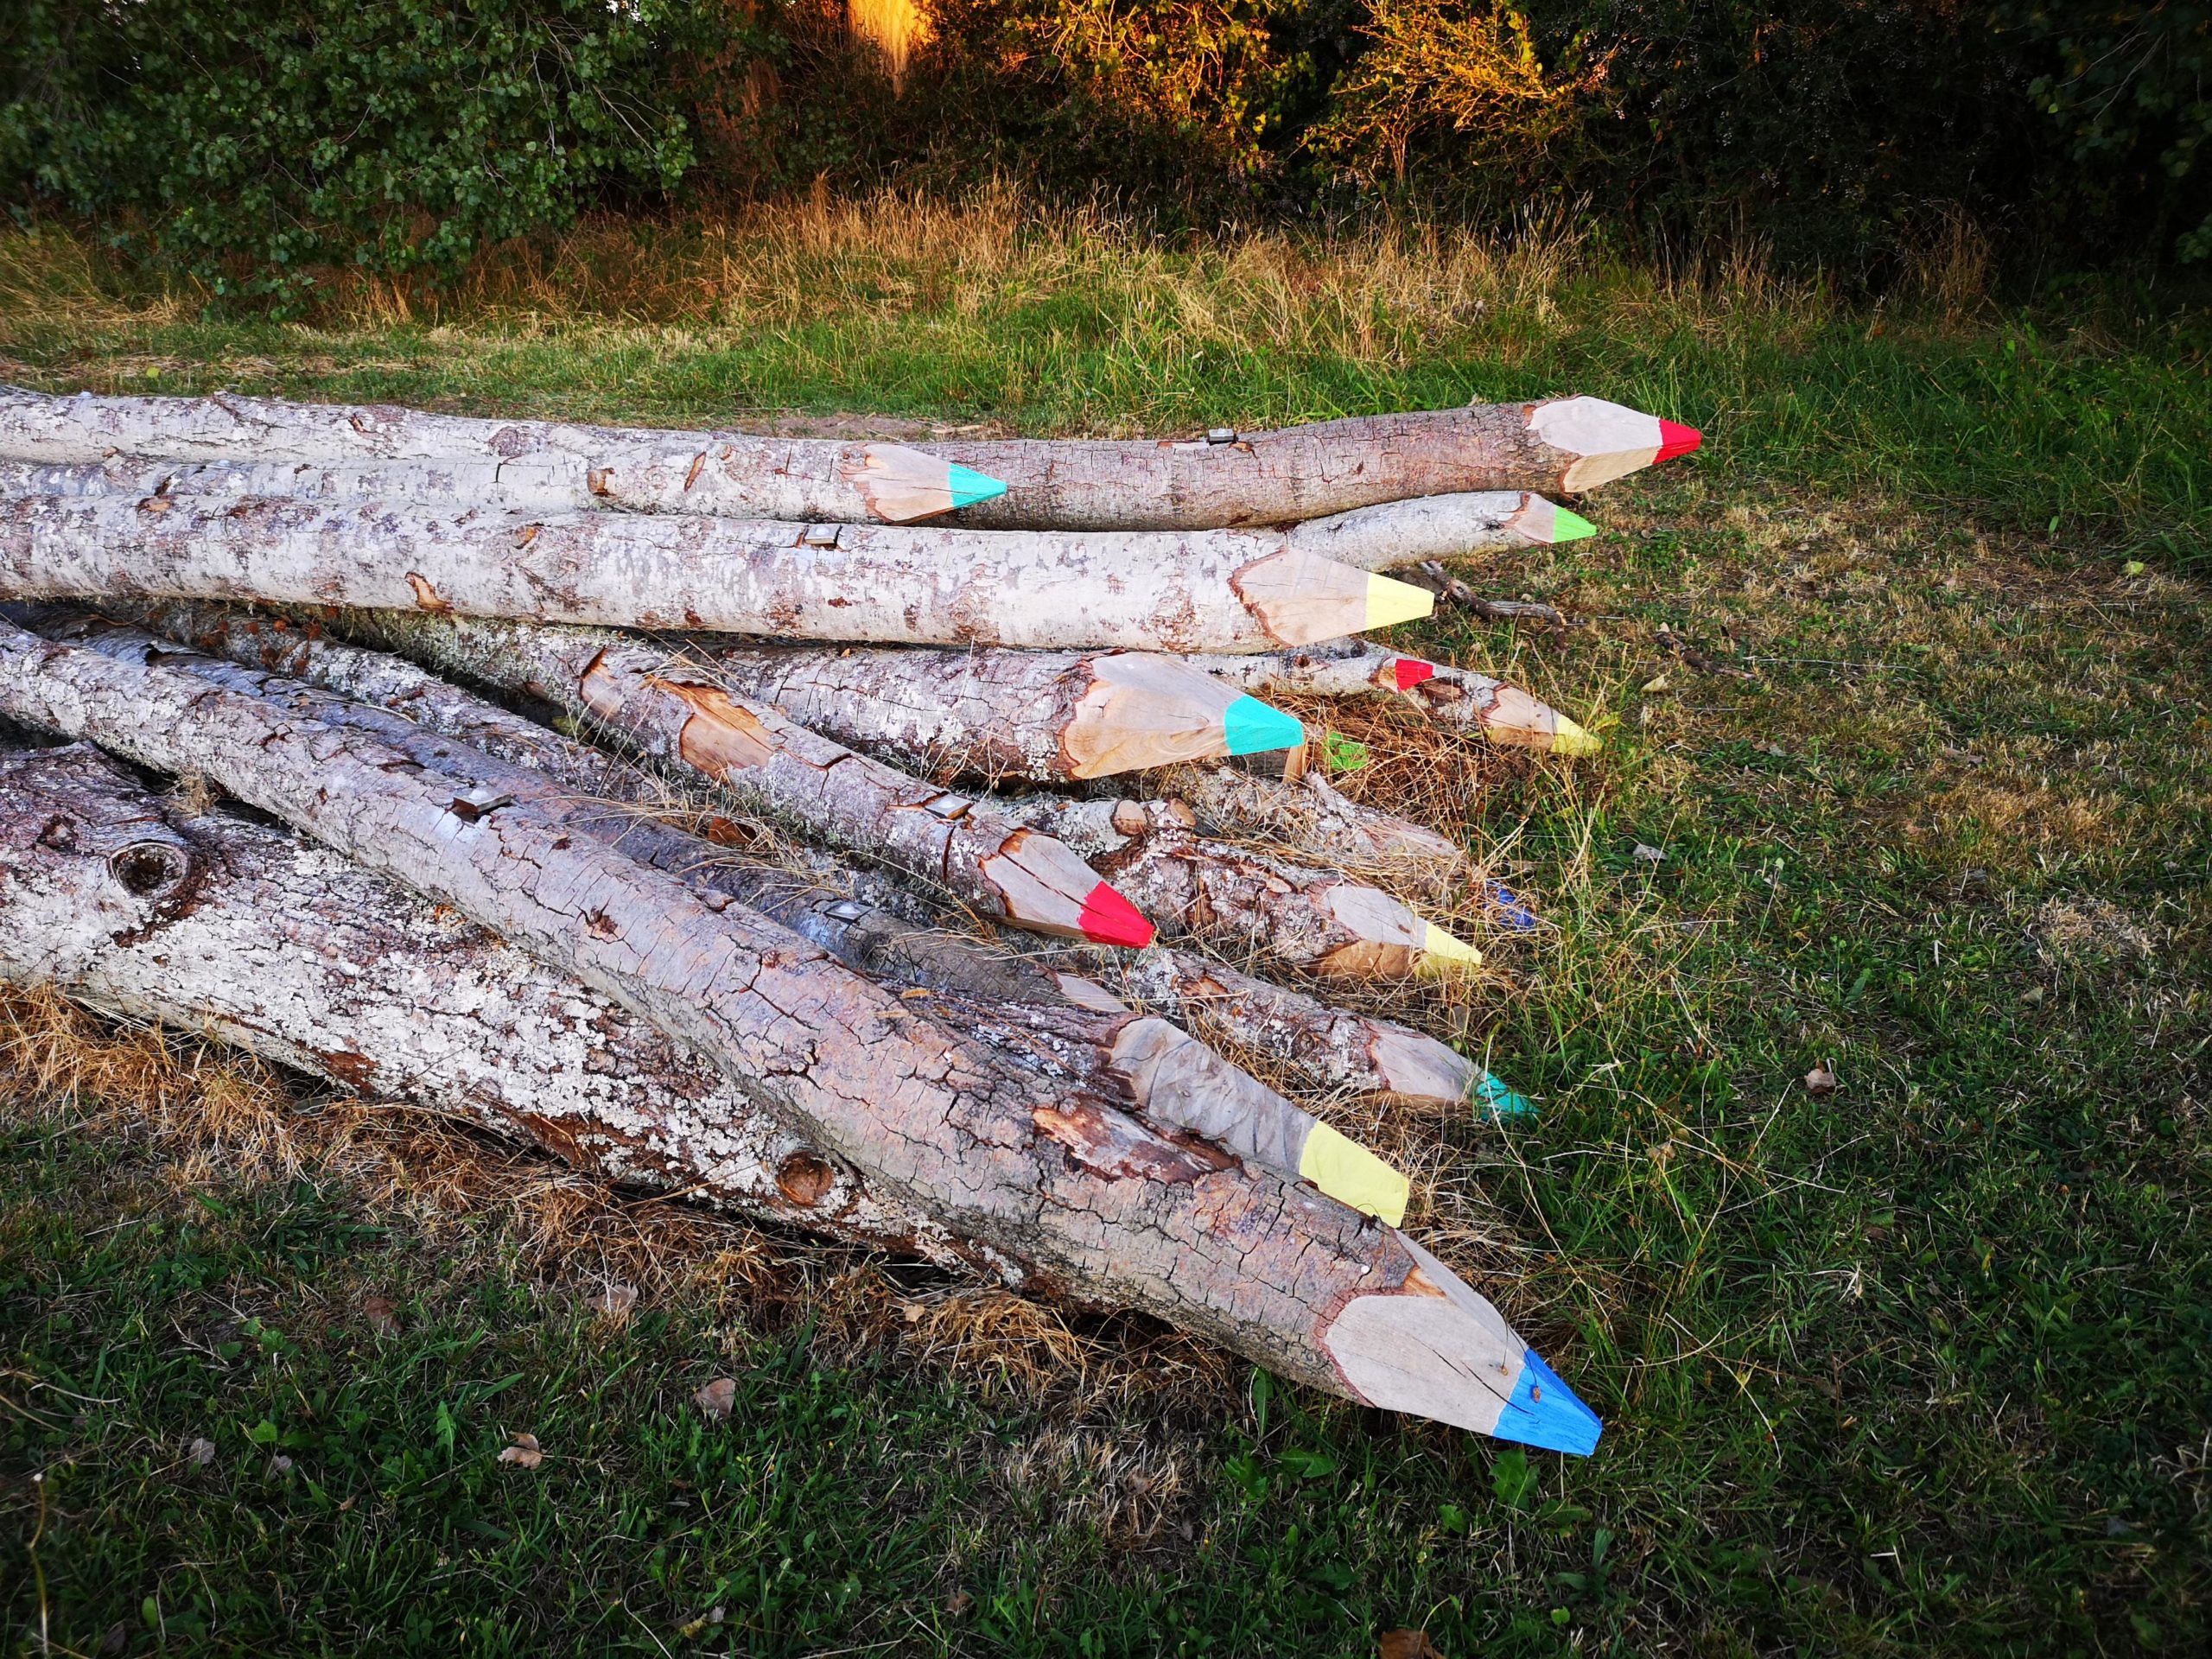 These+logs+cut+and+painted+to+look+like+giant+pencils